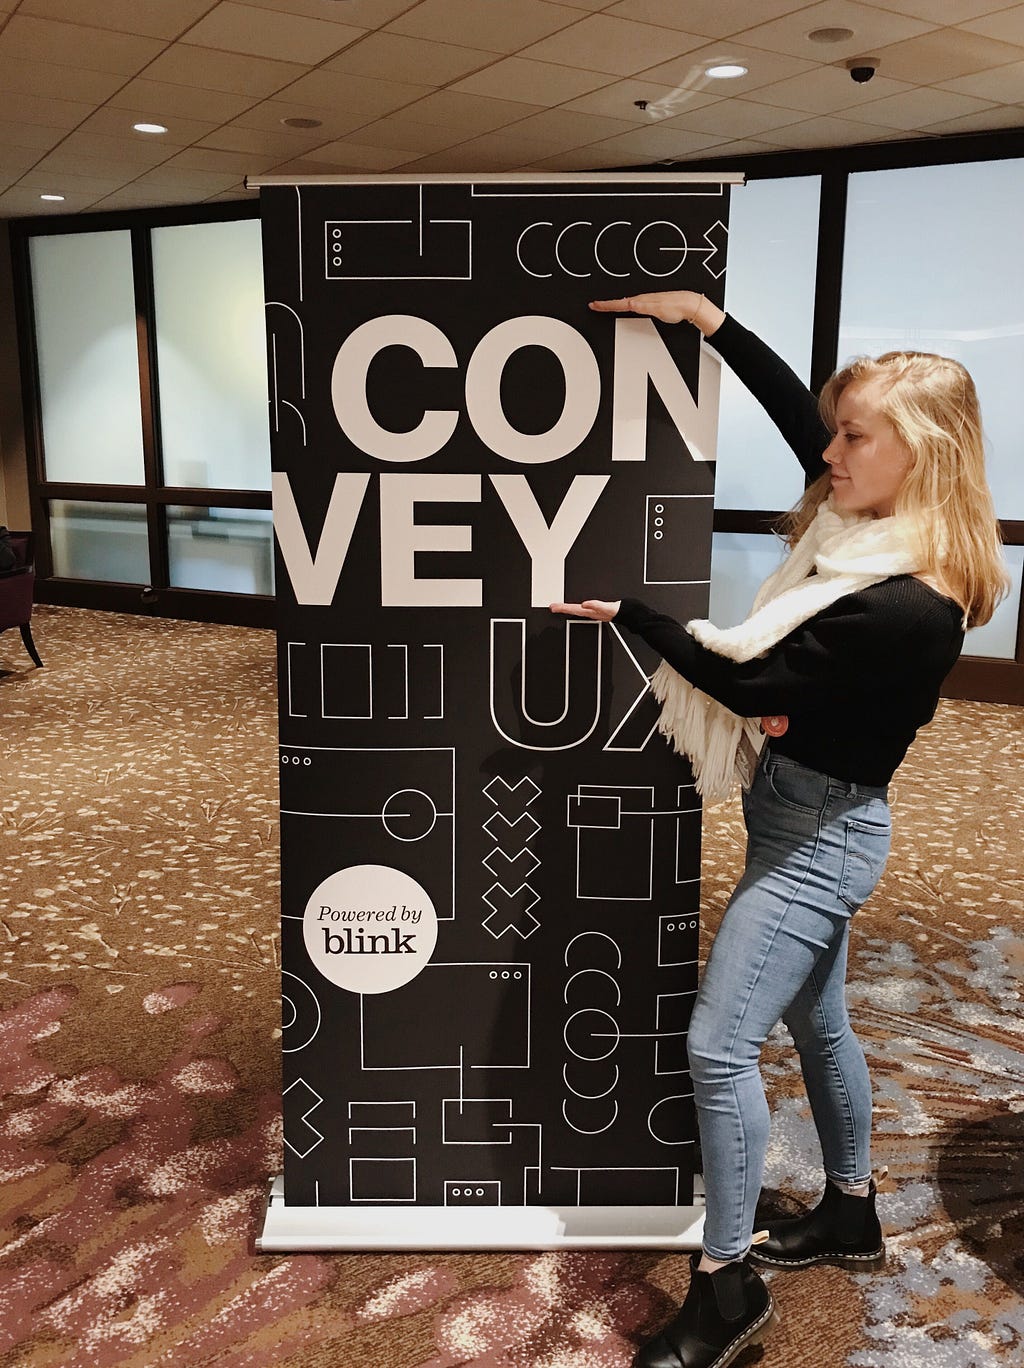 Julianne poses next to a tall poster that says “Convey UX, powered by Blink”